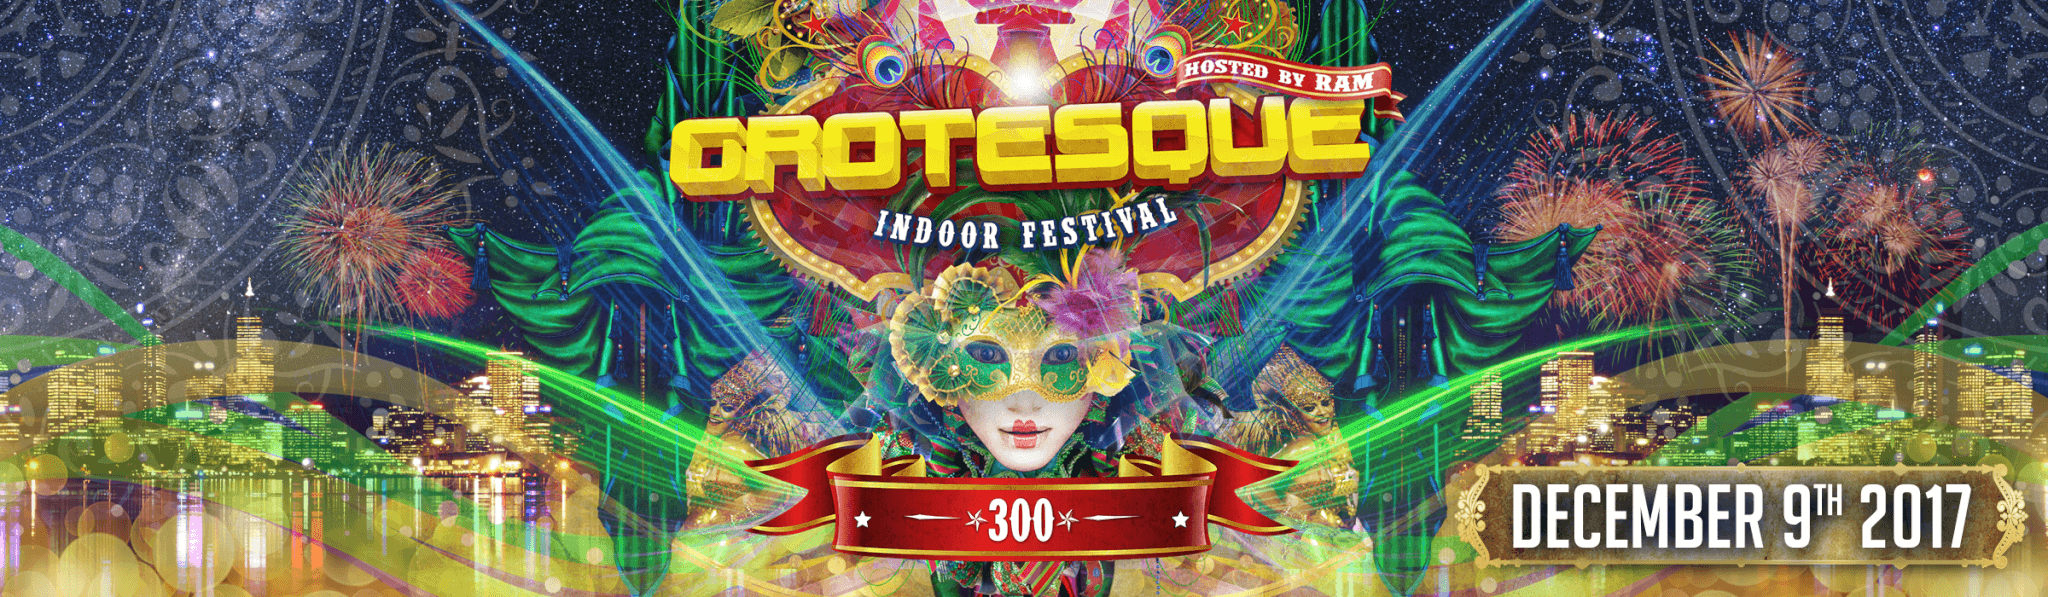 PT Events presents Grotesque Indoor Festival 300 banner